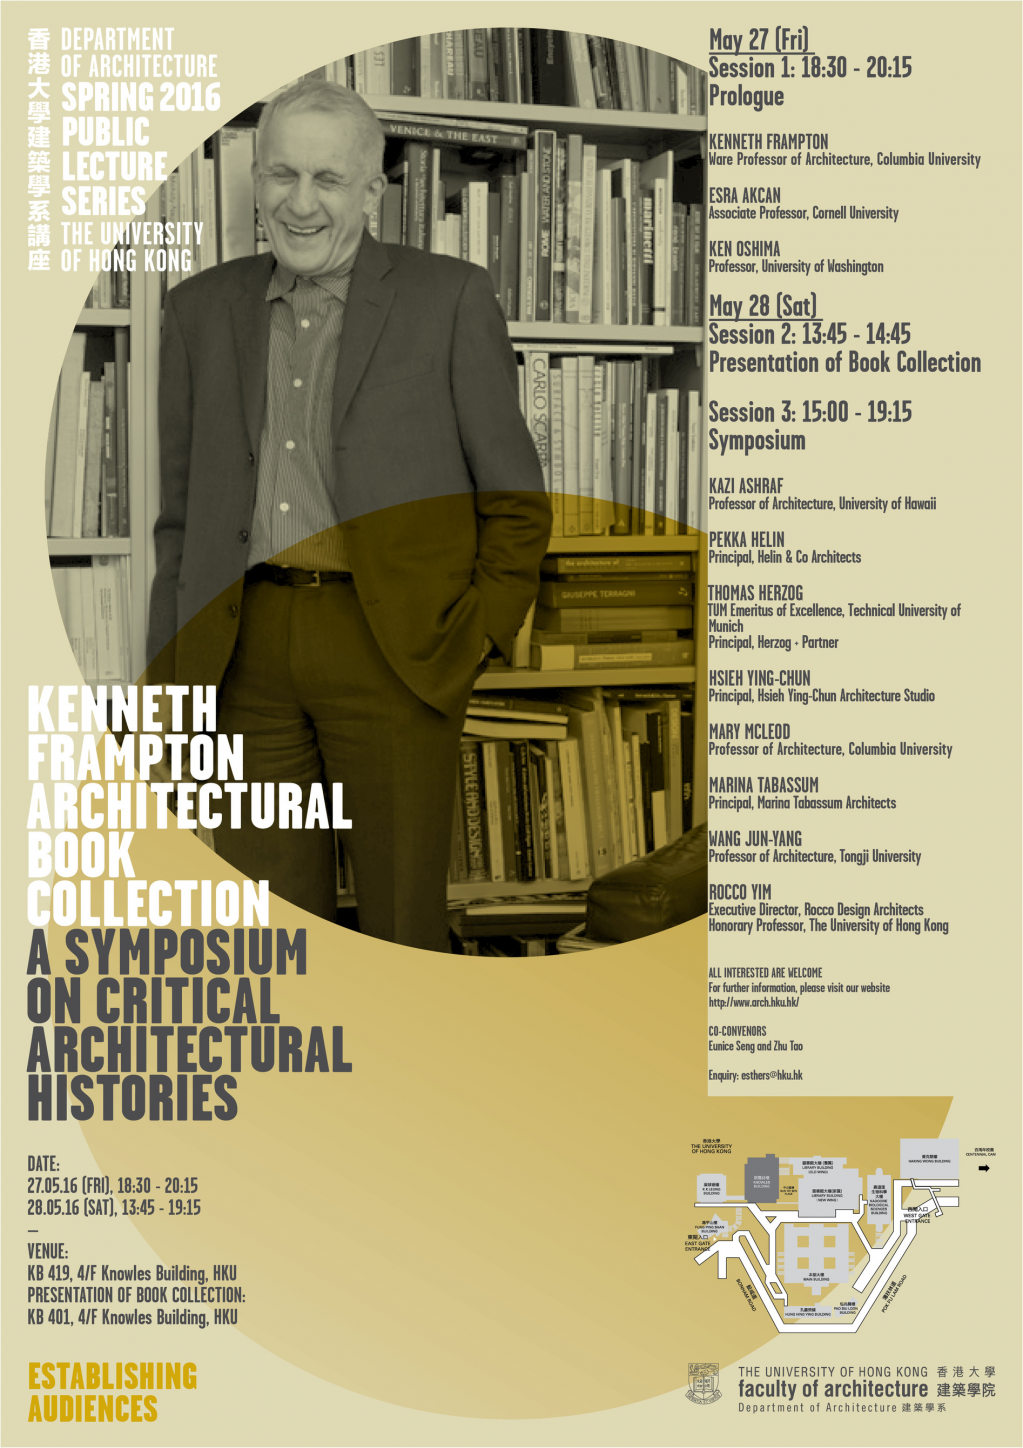 Kenneth Frampton Architectural Book Collection: A Symposium on Critical Architectural Histories